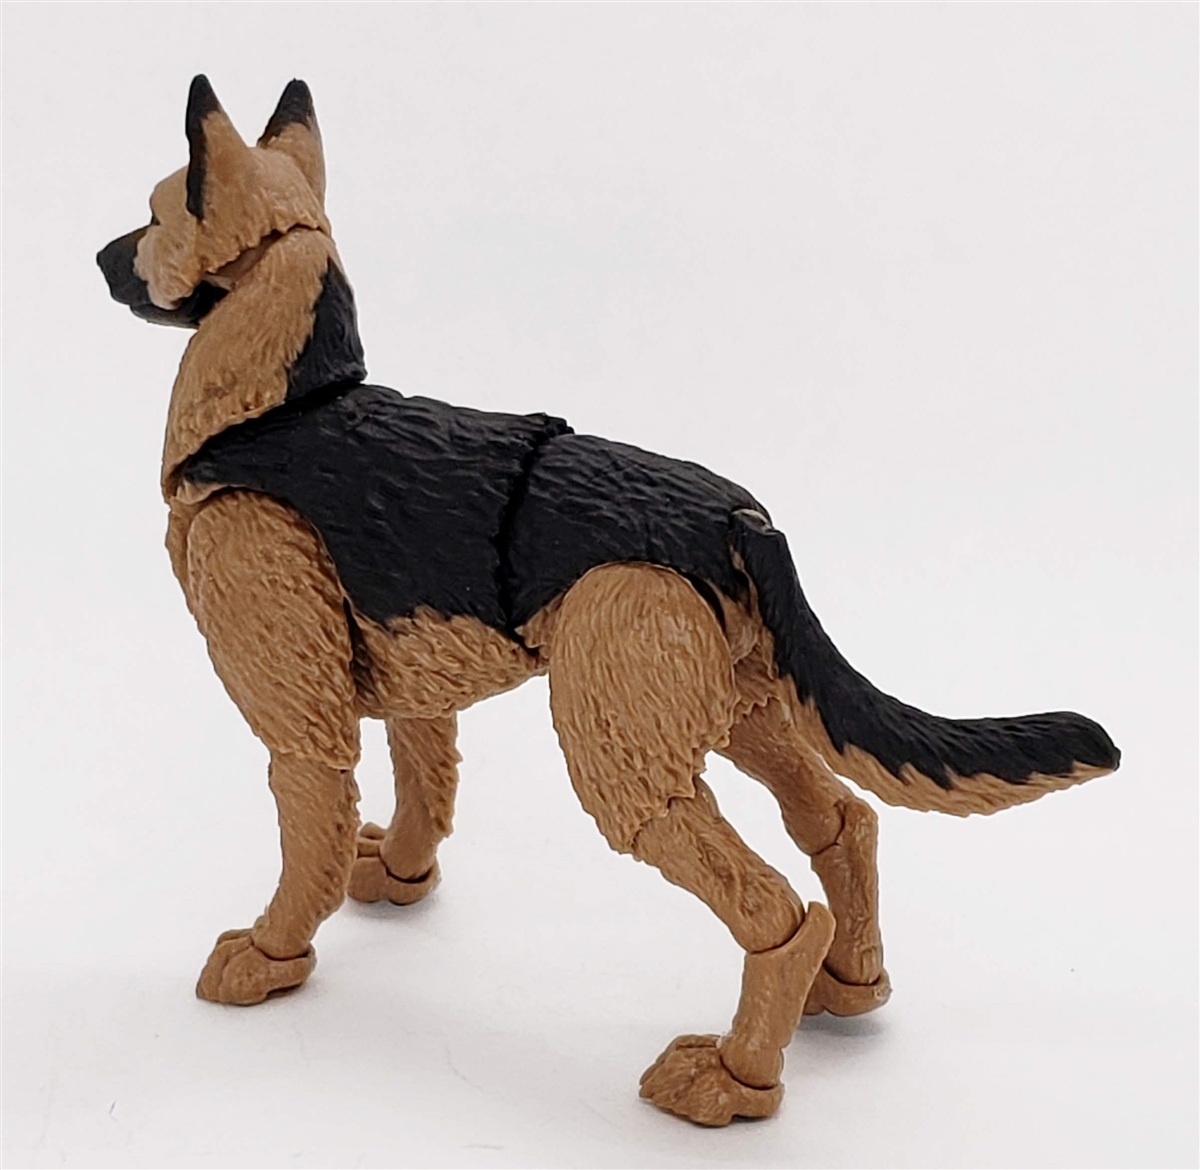 articulated animal figures